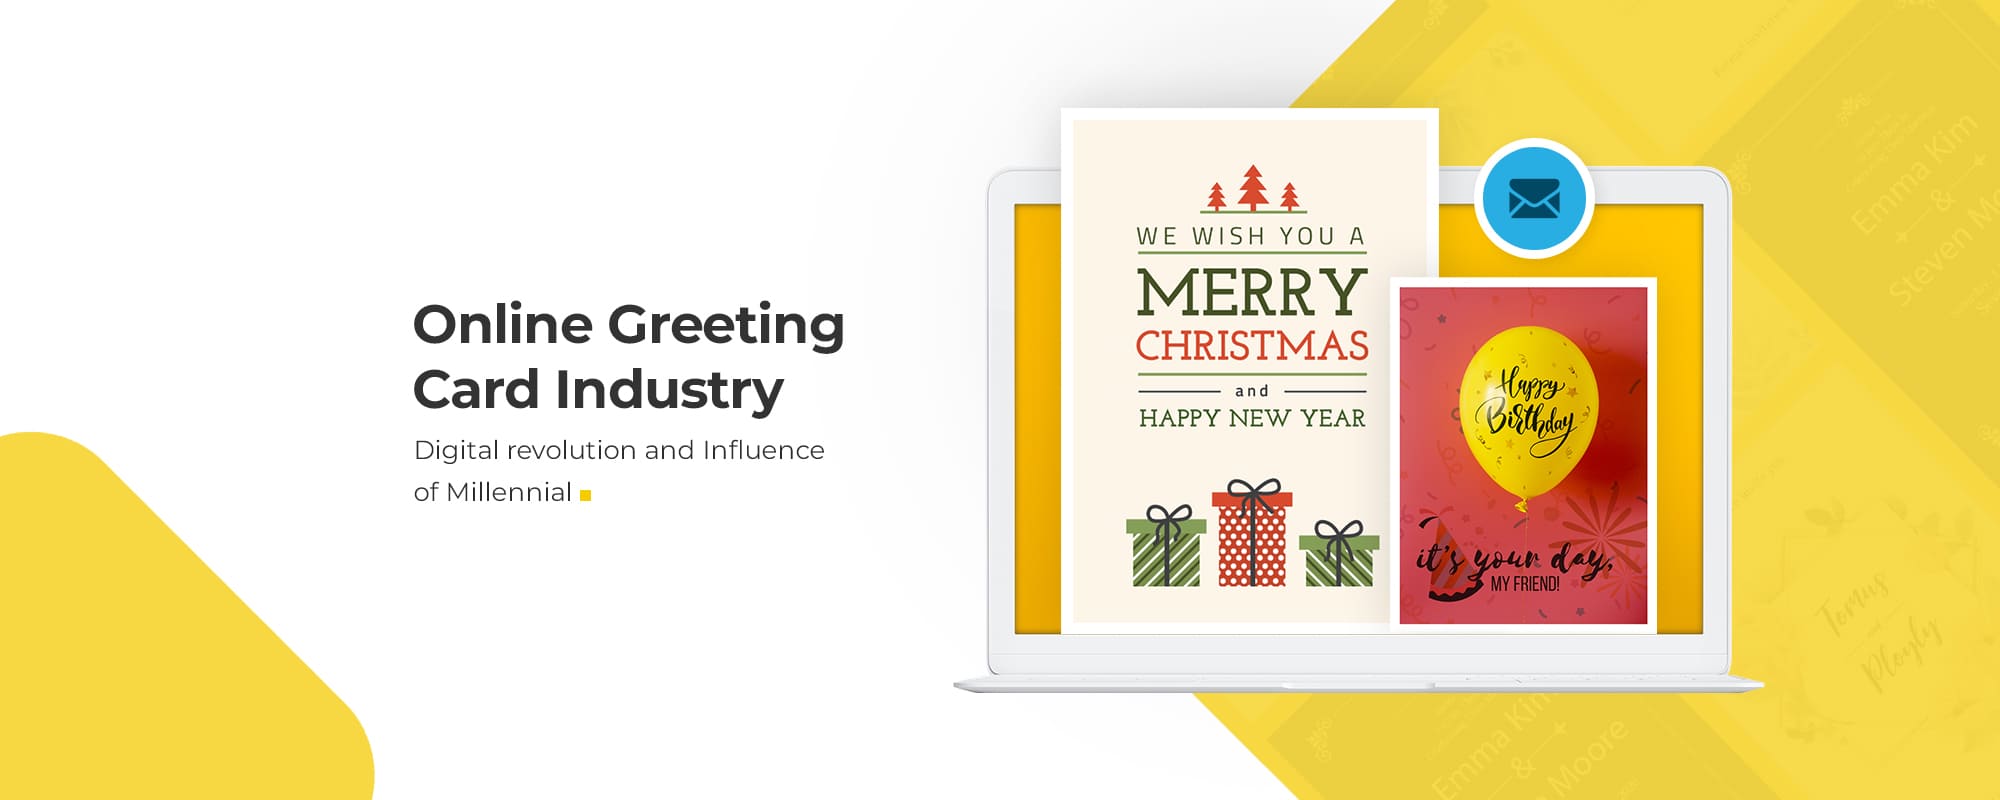 Online Greeting Card Business – Role Of Millennials and Website Features